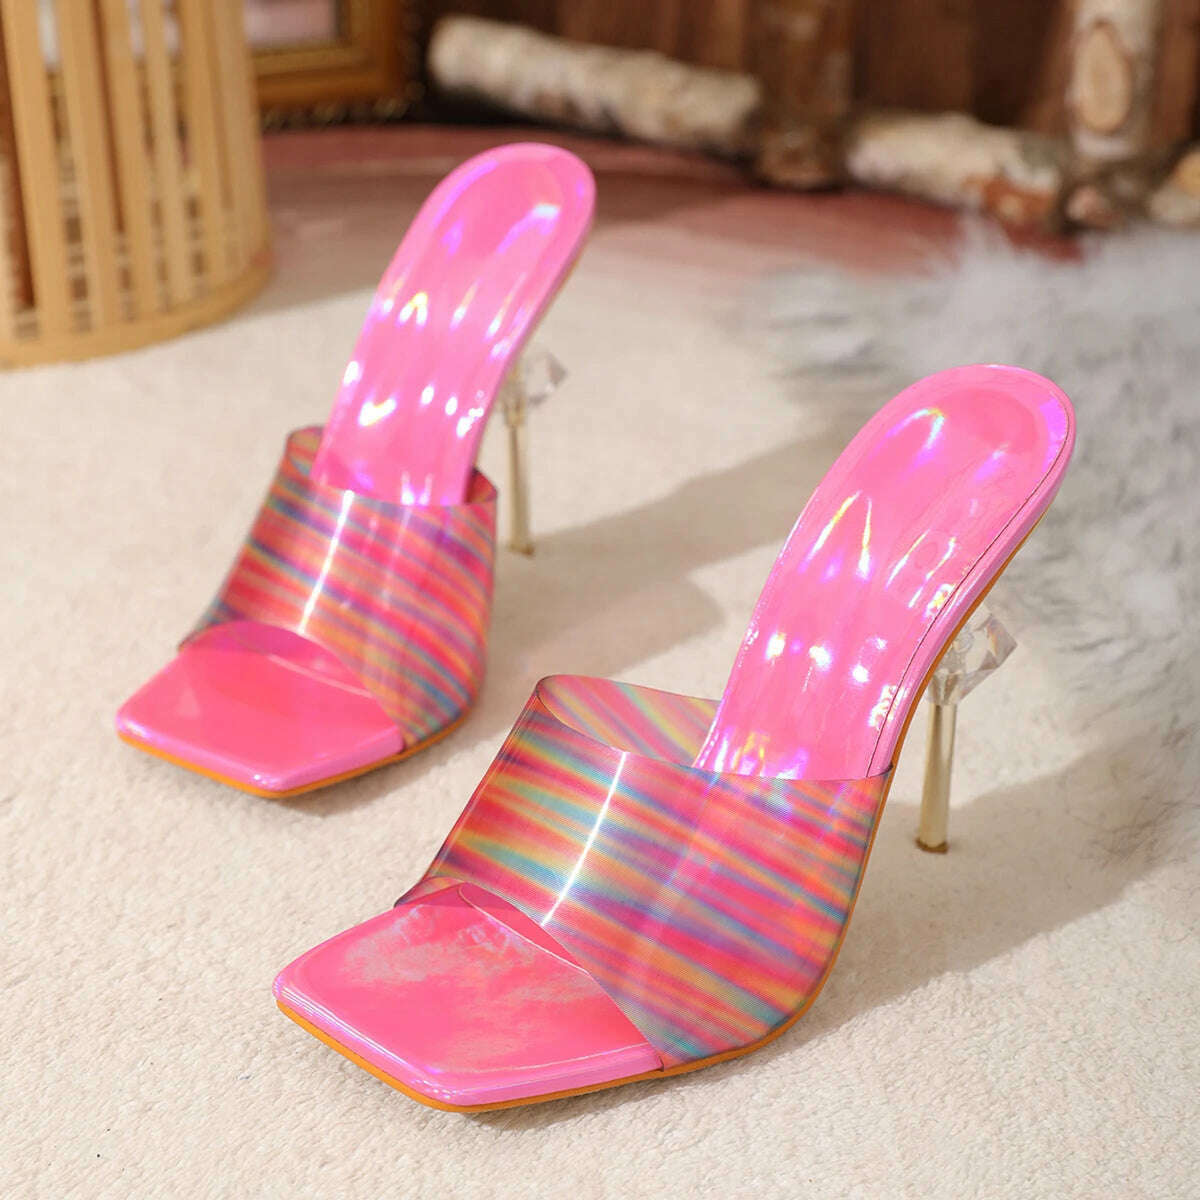 KIMLUD, Aneikeh Gradient Leather PVC Transparent Slippers For Women Sexy Square Toe Strange High Heels Sandals Summer Fashion Party Shoe, KIMLUD Womens Clothes